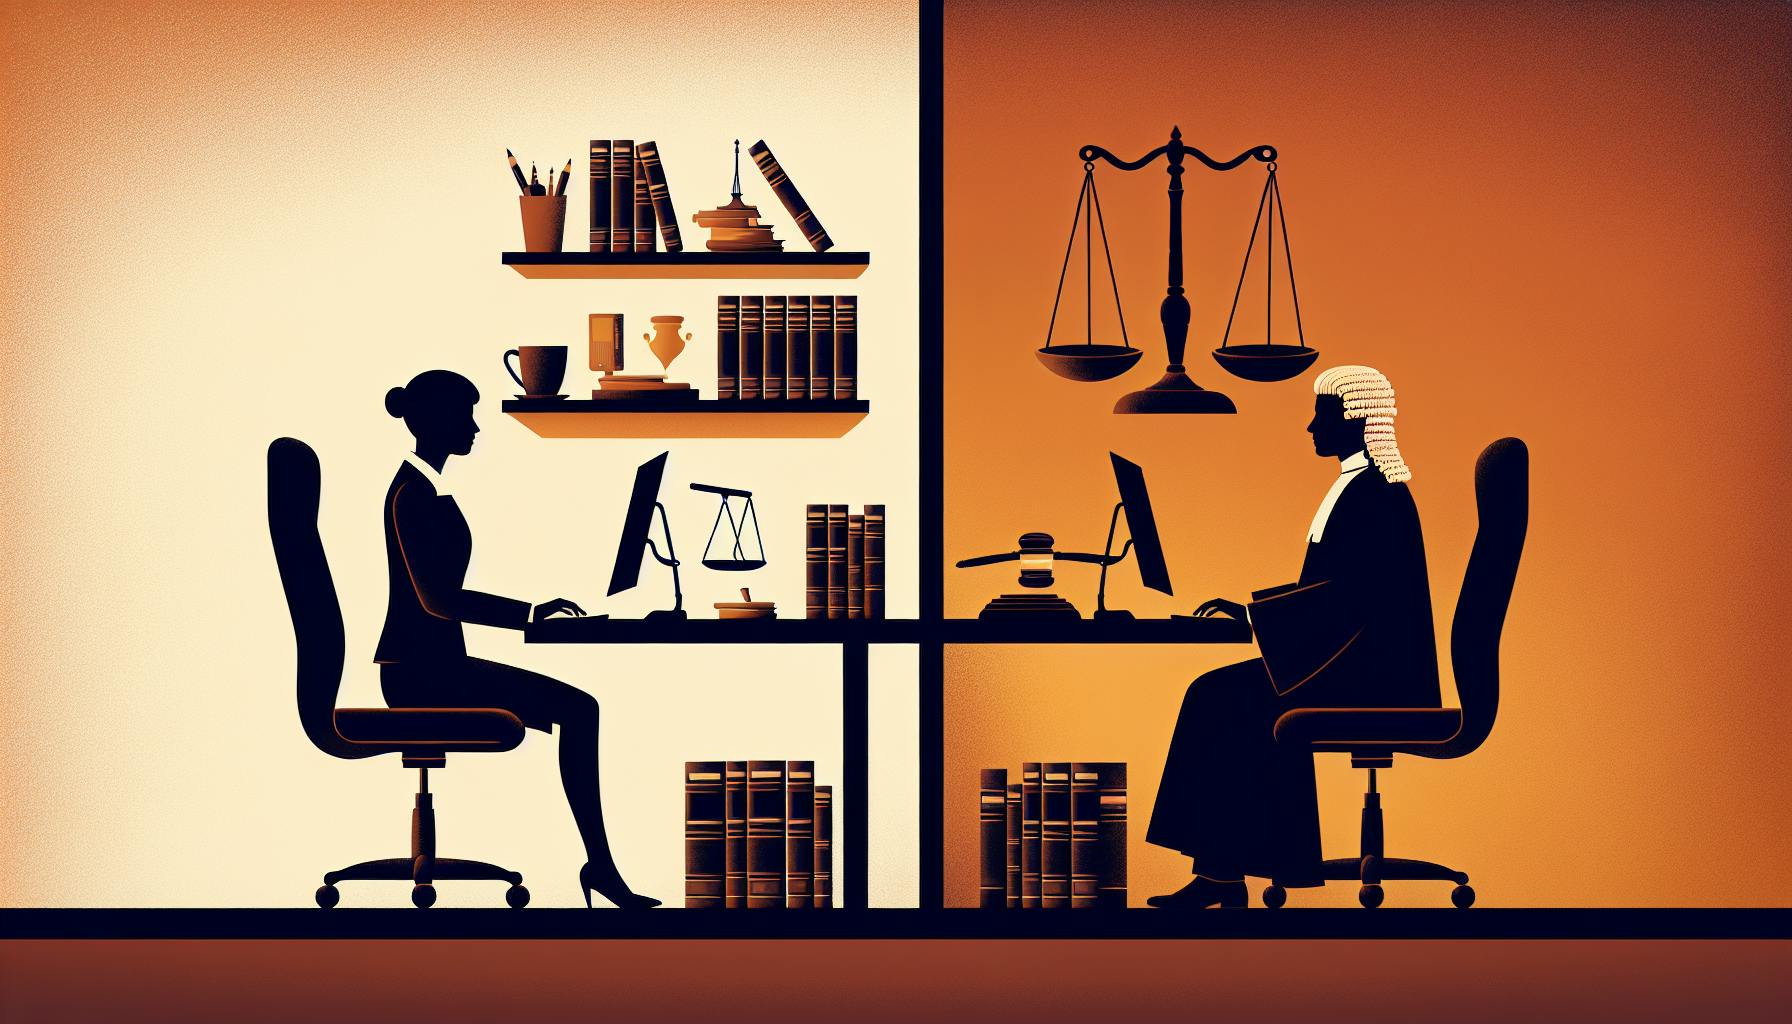 Solicitor vs Barrister: Roles in the Legal Profession